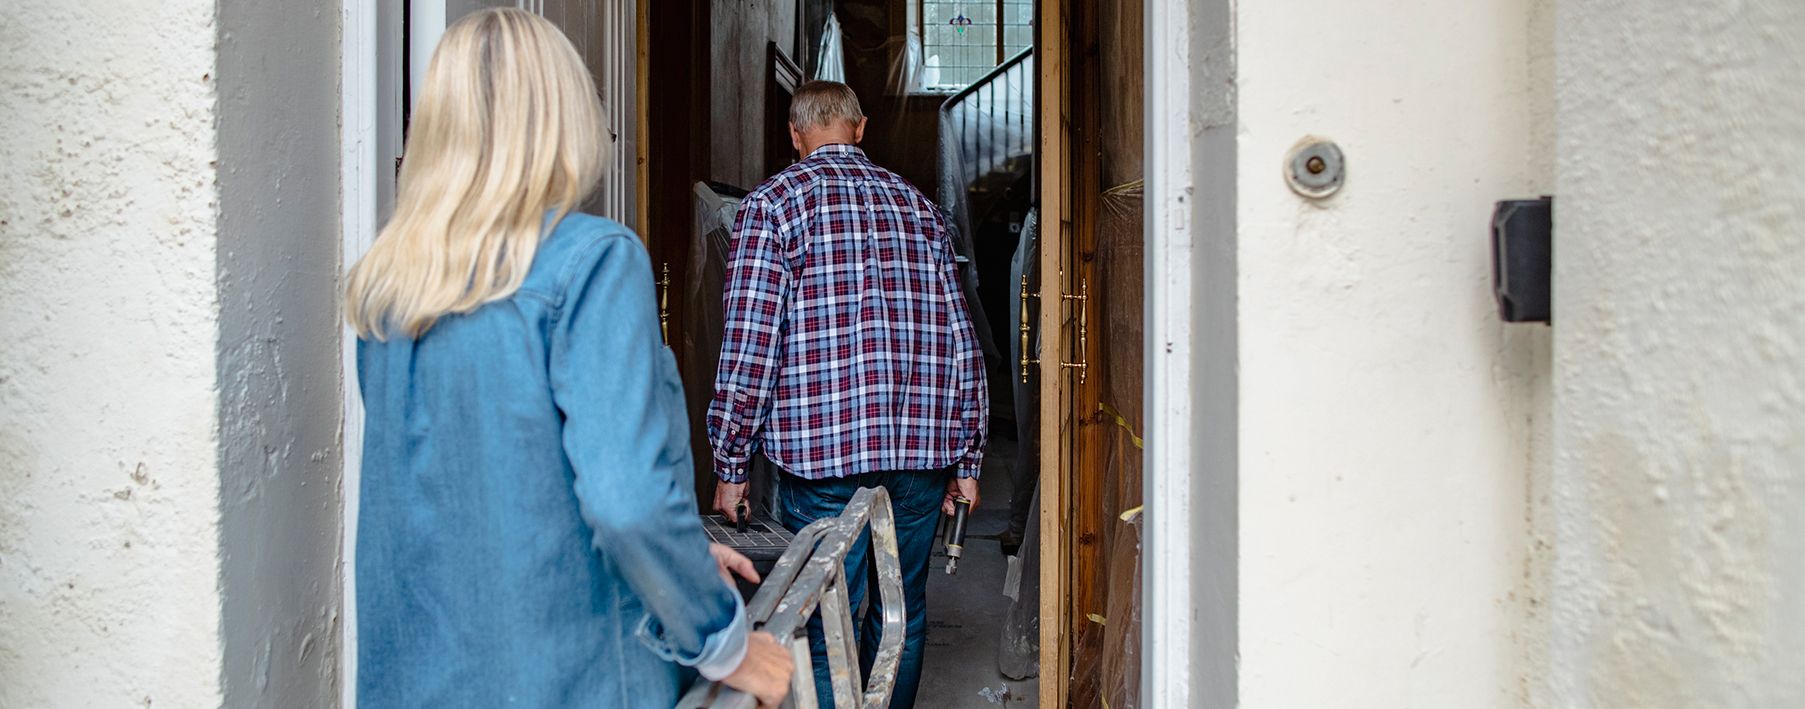 Image of an older man and woman carrying a ladder into a house